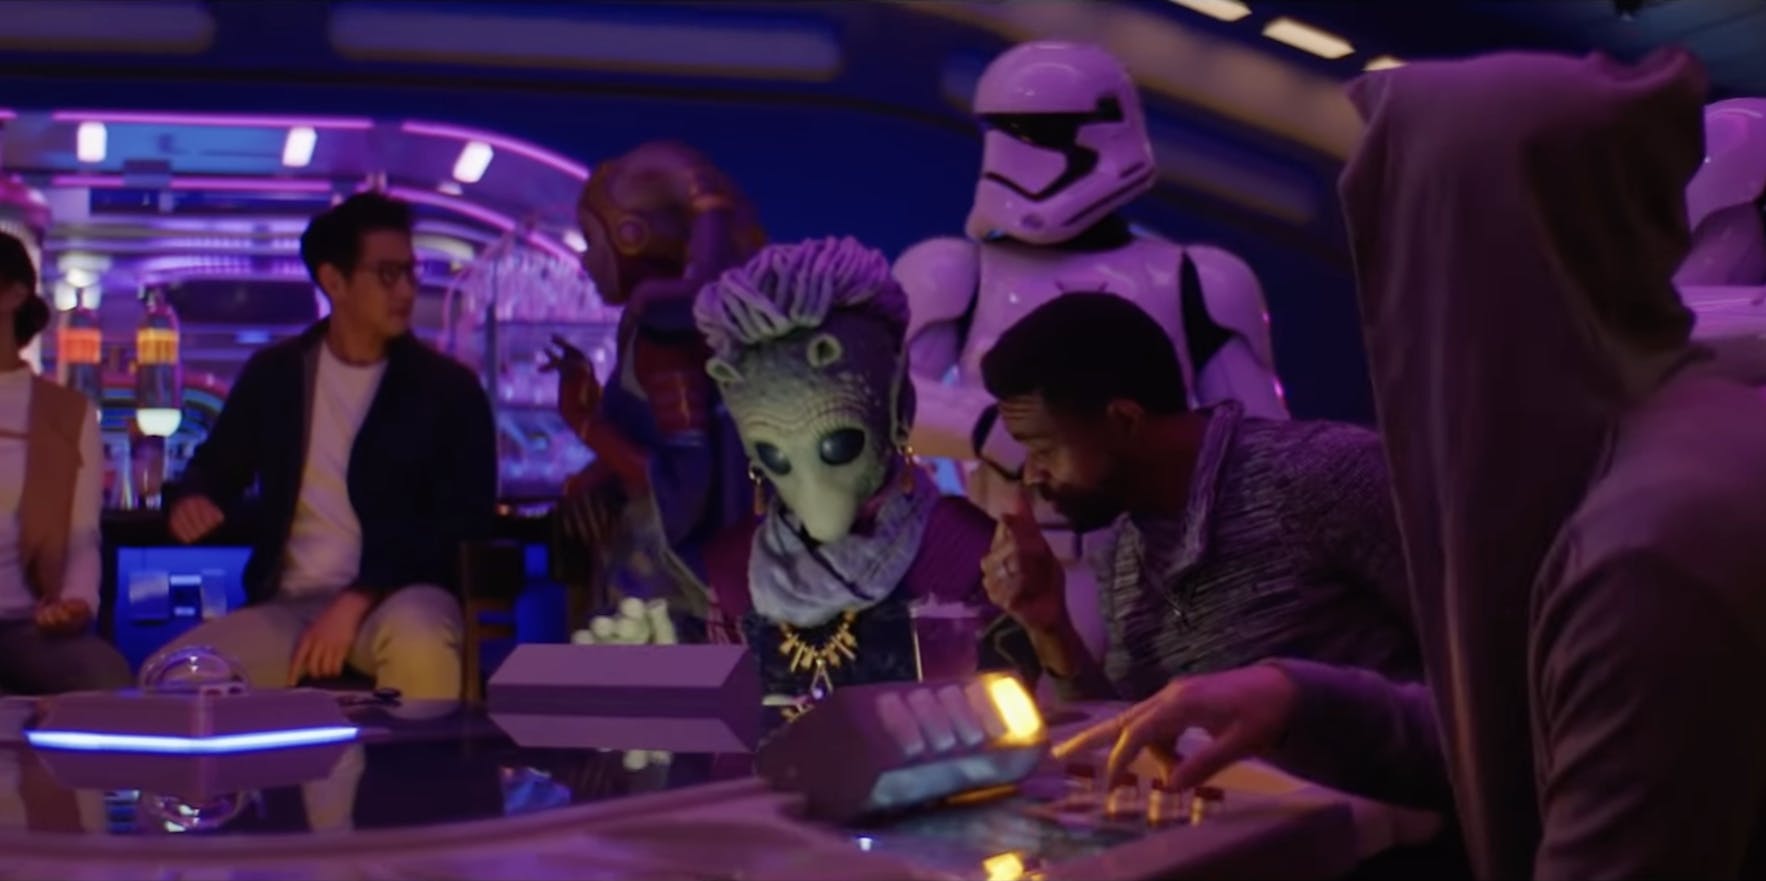 a visitor at disney's new star wars galactic starcruiser immersive hotel